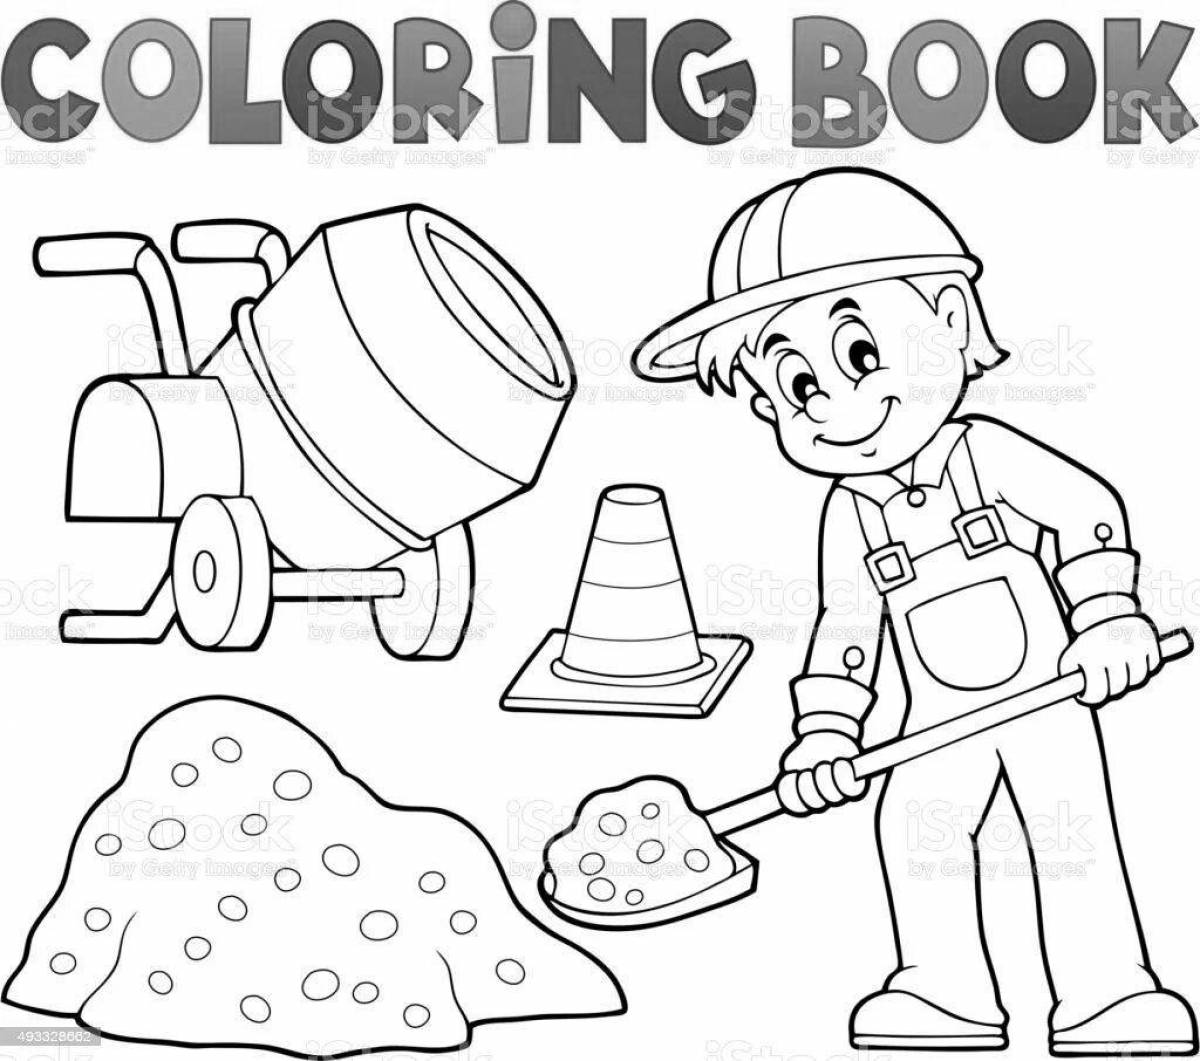 Adorable occupational health and safety through the eyes of children for preschoolers